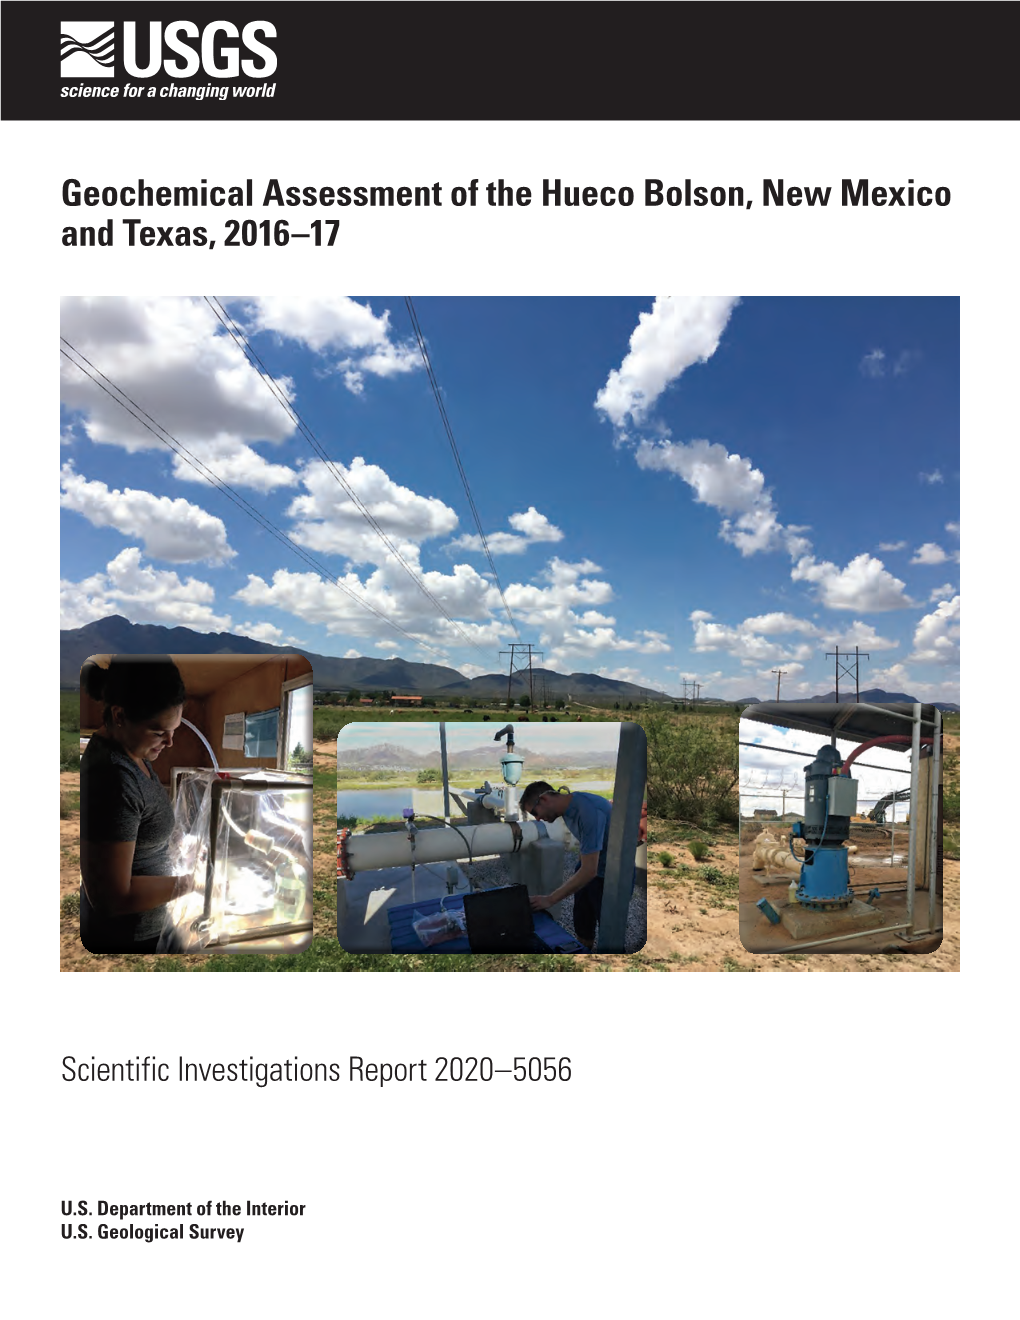 Geochemical Assessment of the Hueco Bolson, New Mexico and Texas, 2016–17